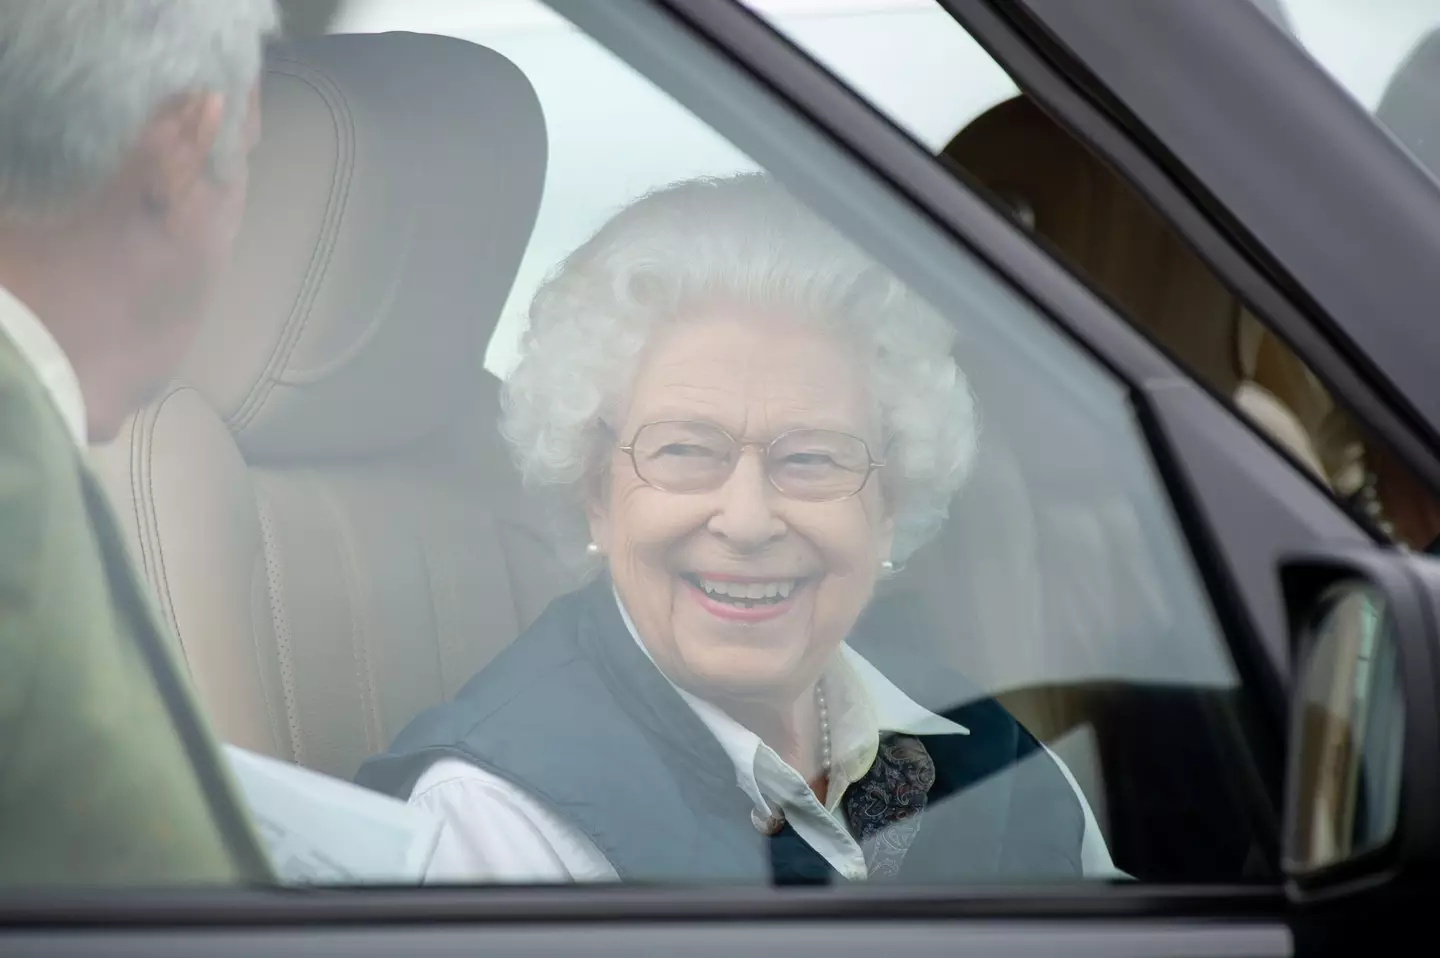 The Queen was an avid driver.